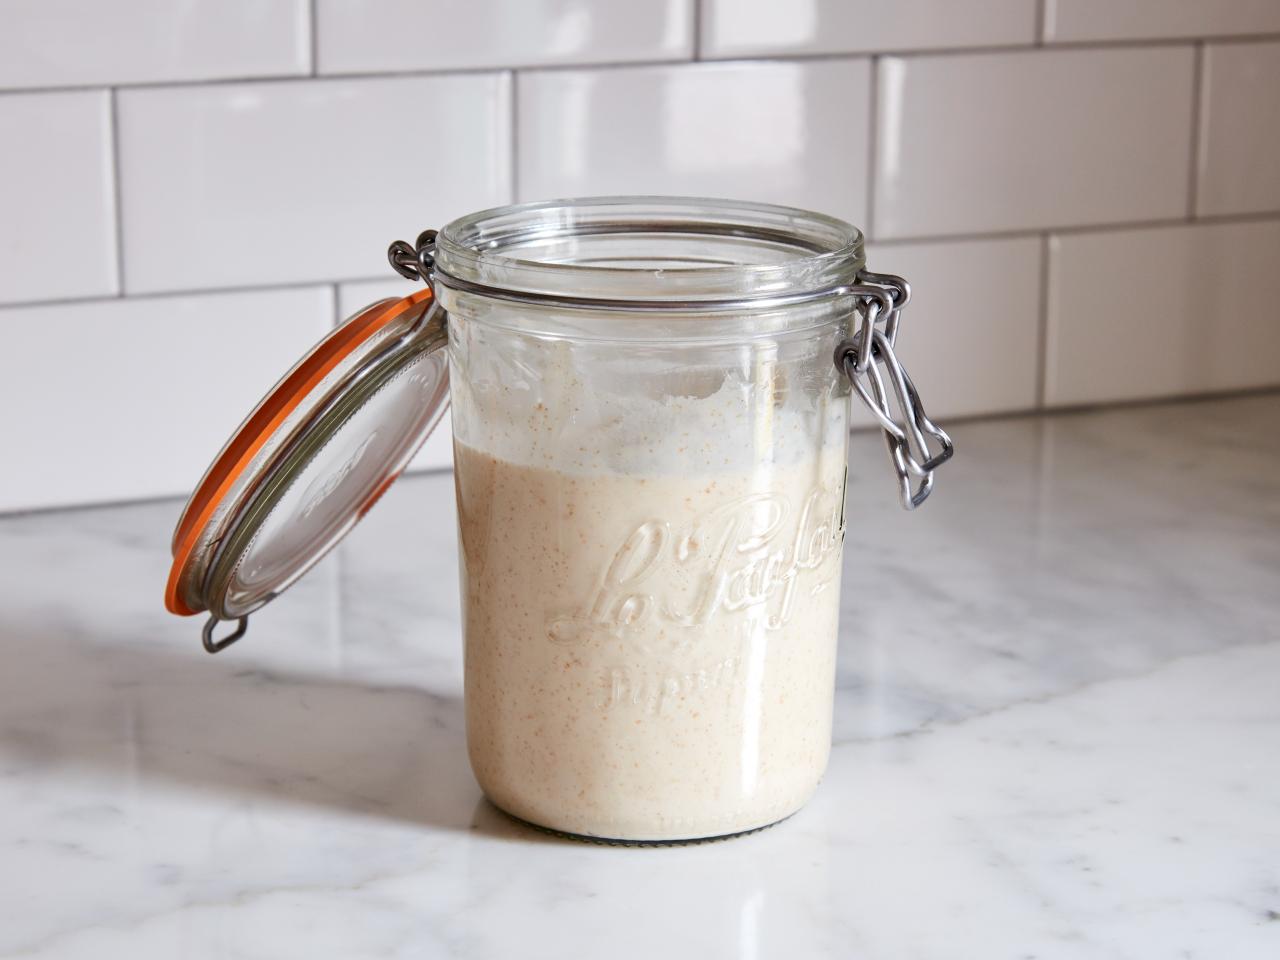 Tips for Making a Sourdough Starter from Scratch